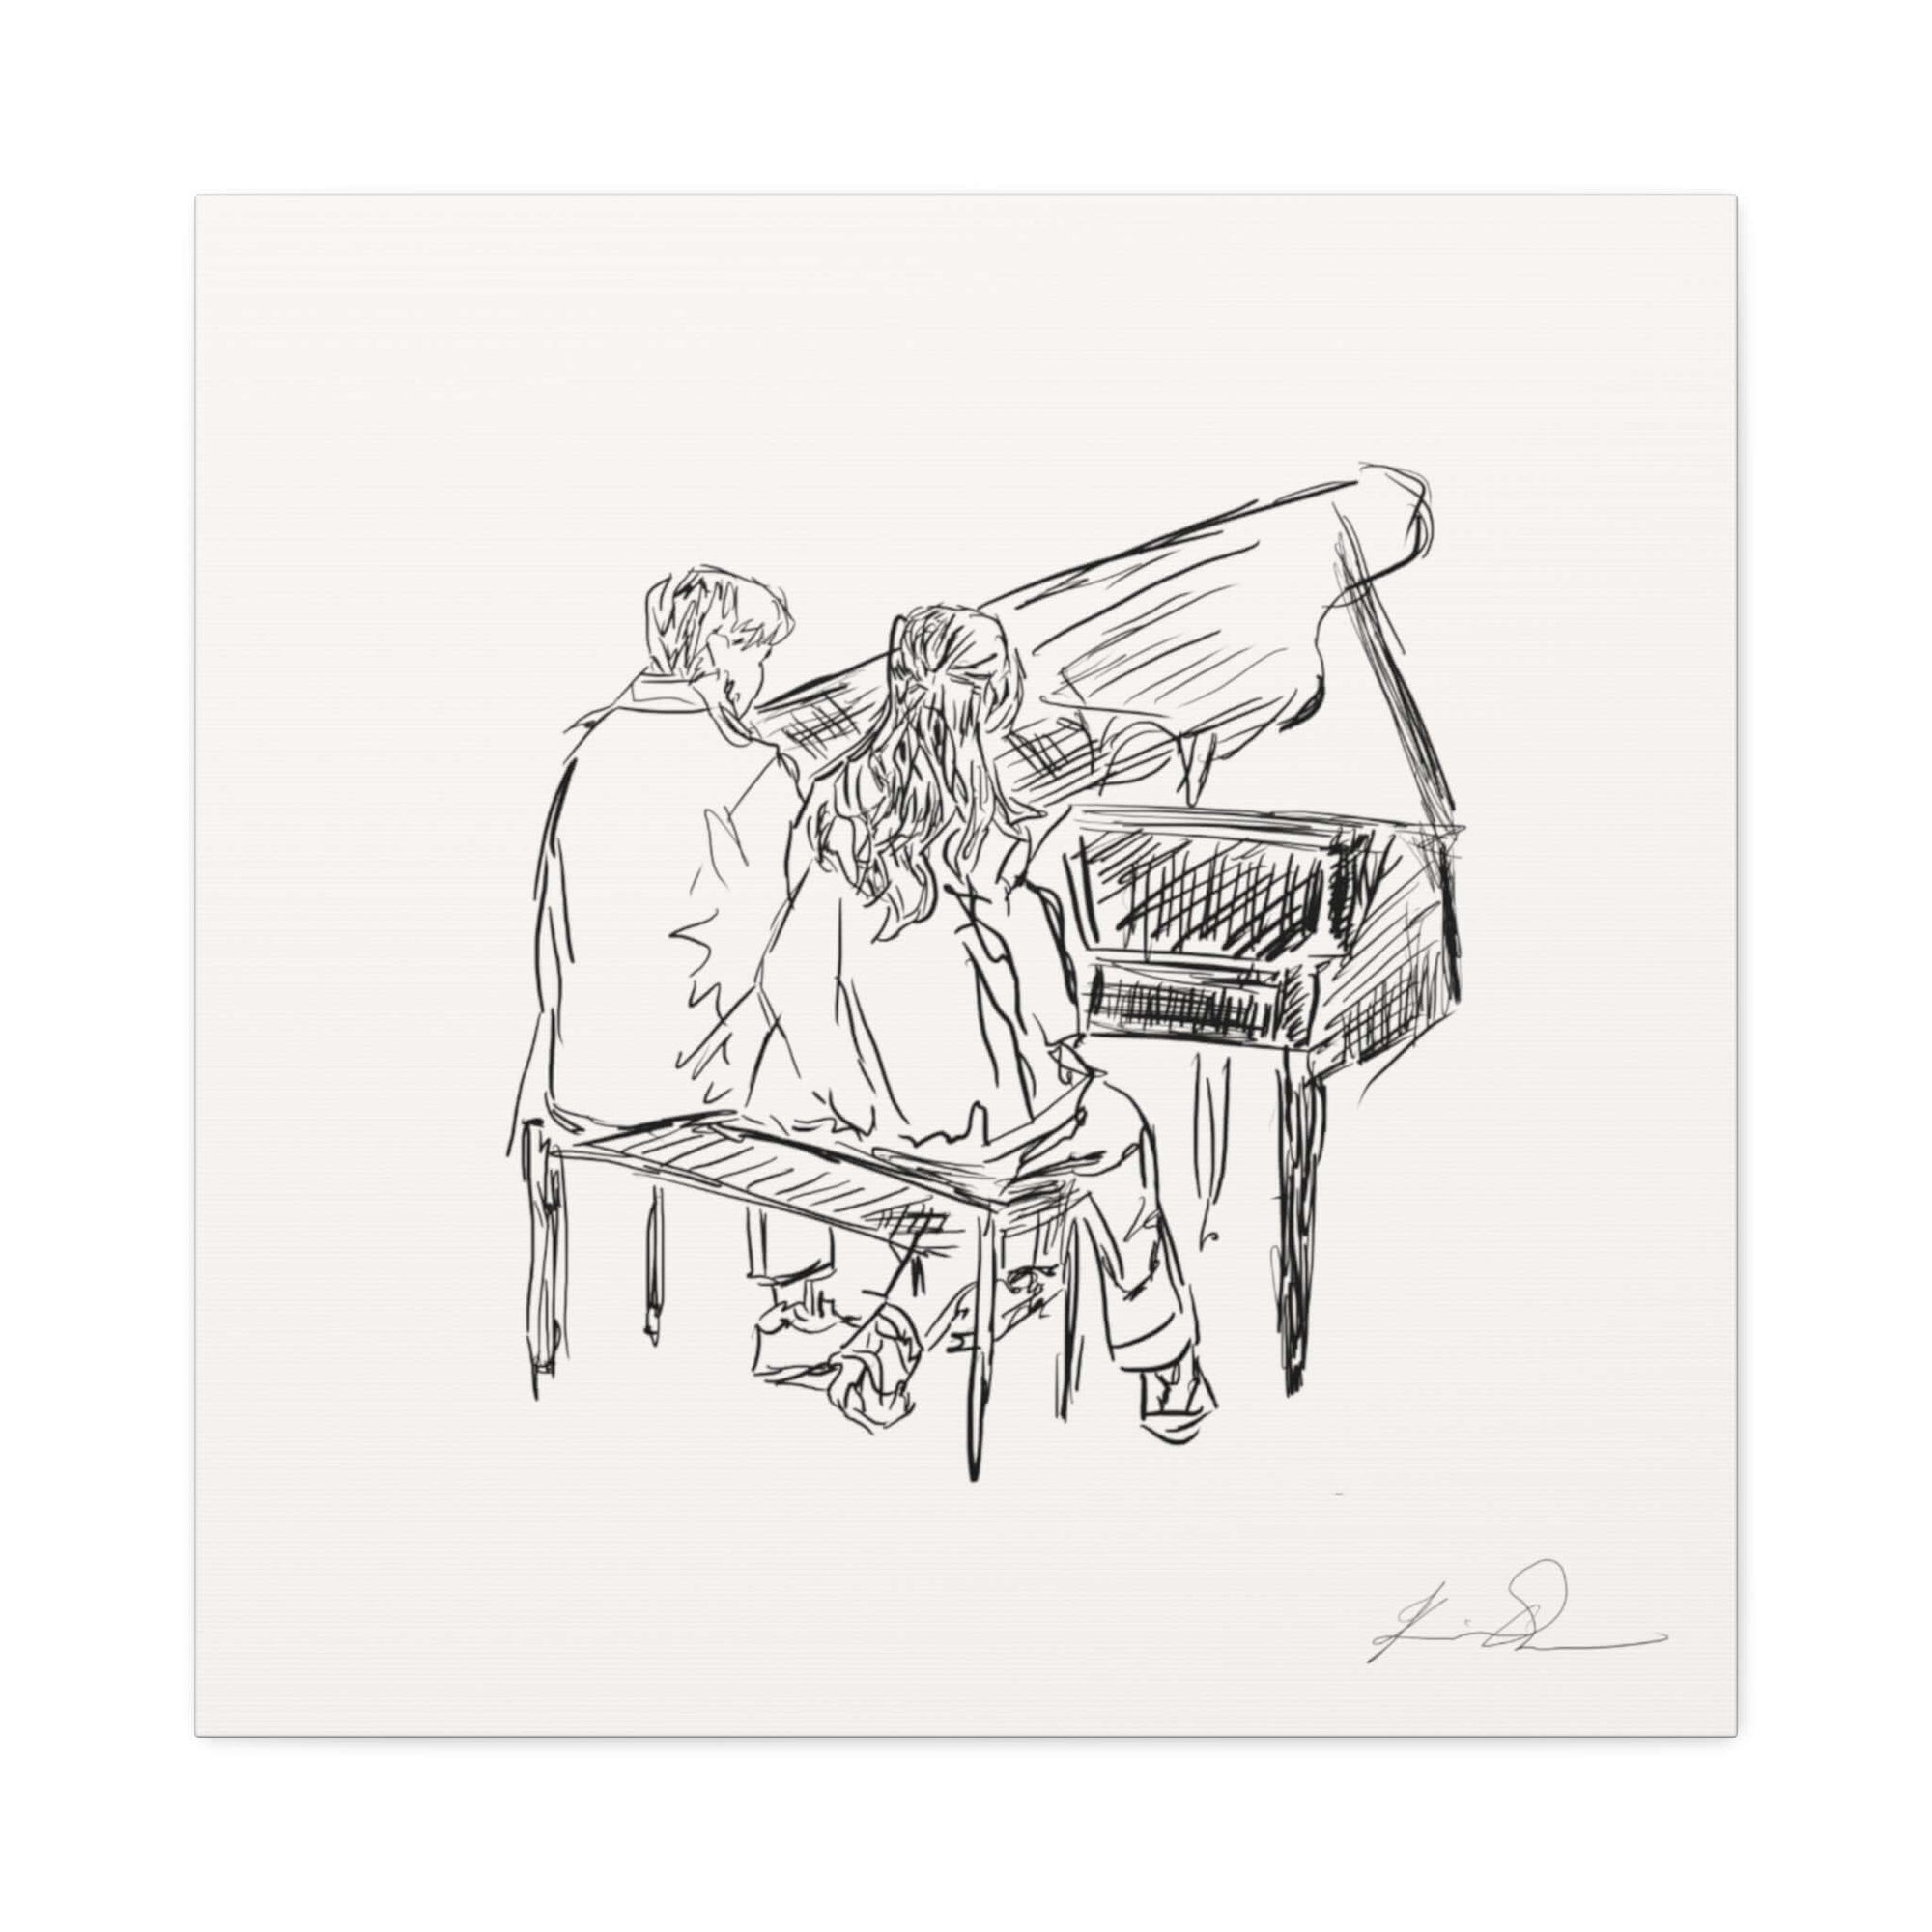 "Love on the Beat canvas print featuring a sketch of two people playing a grand piano, showcasing harmony between two souls."